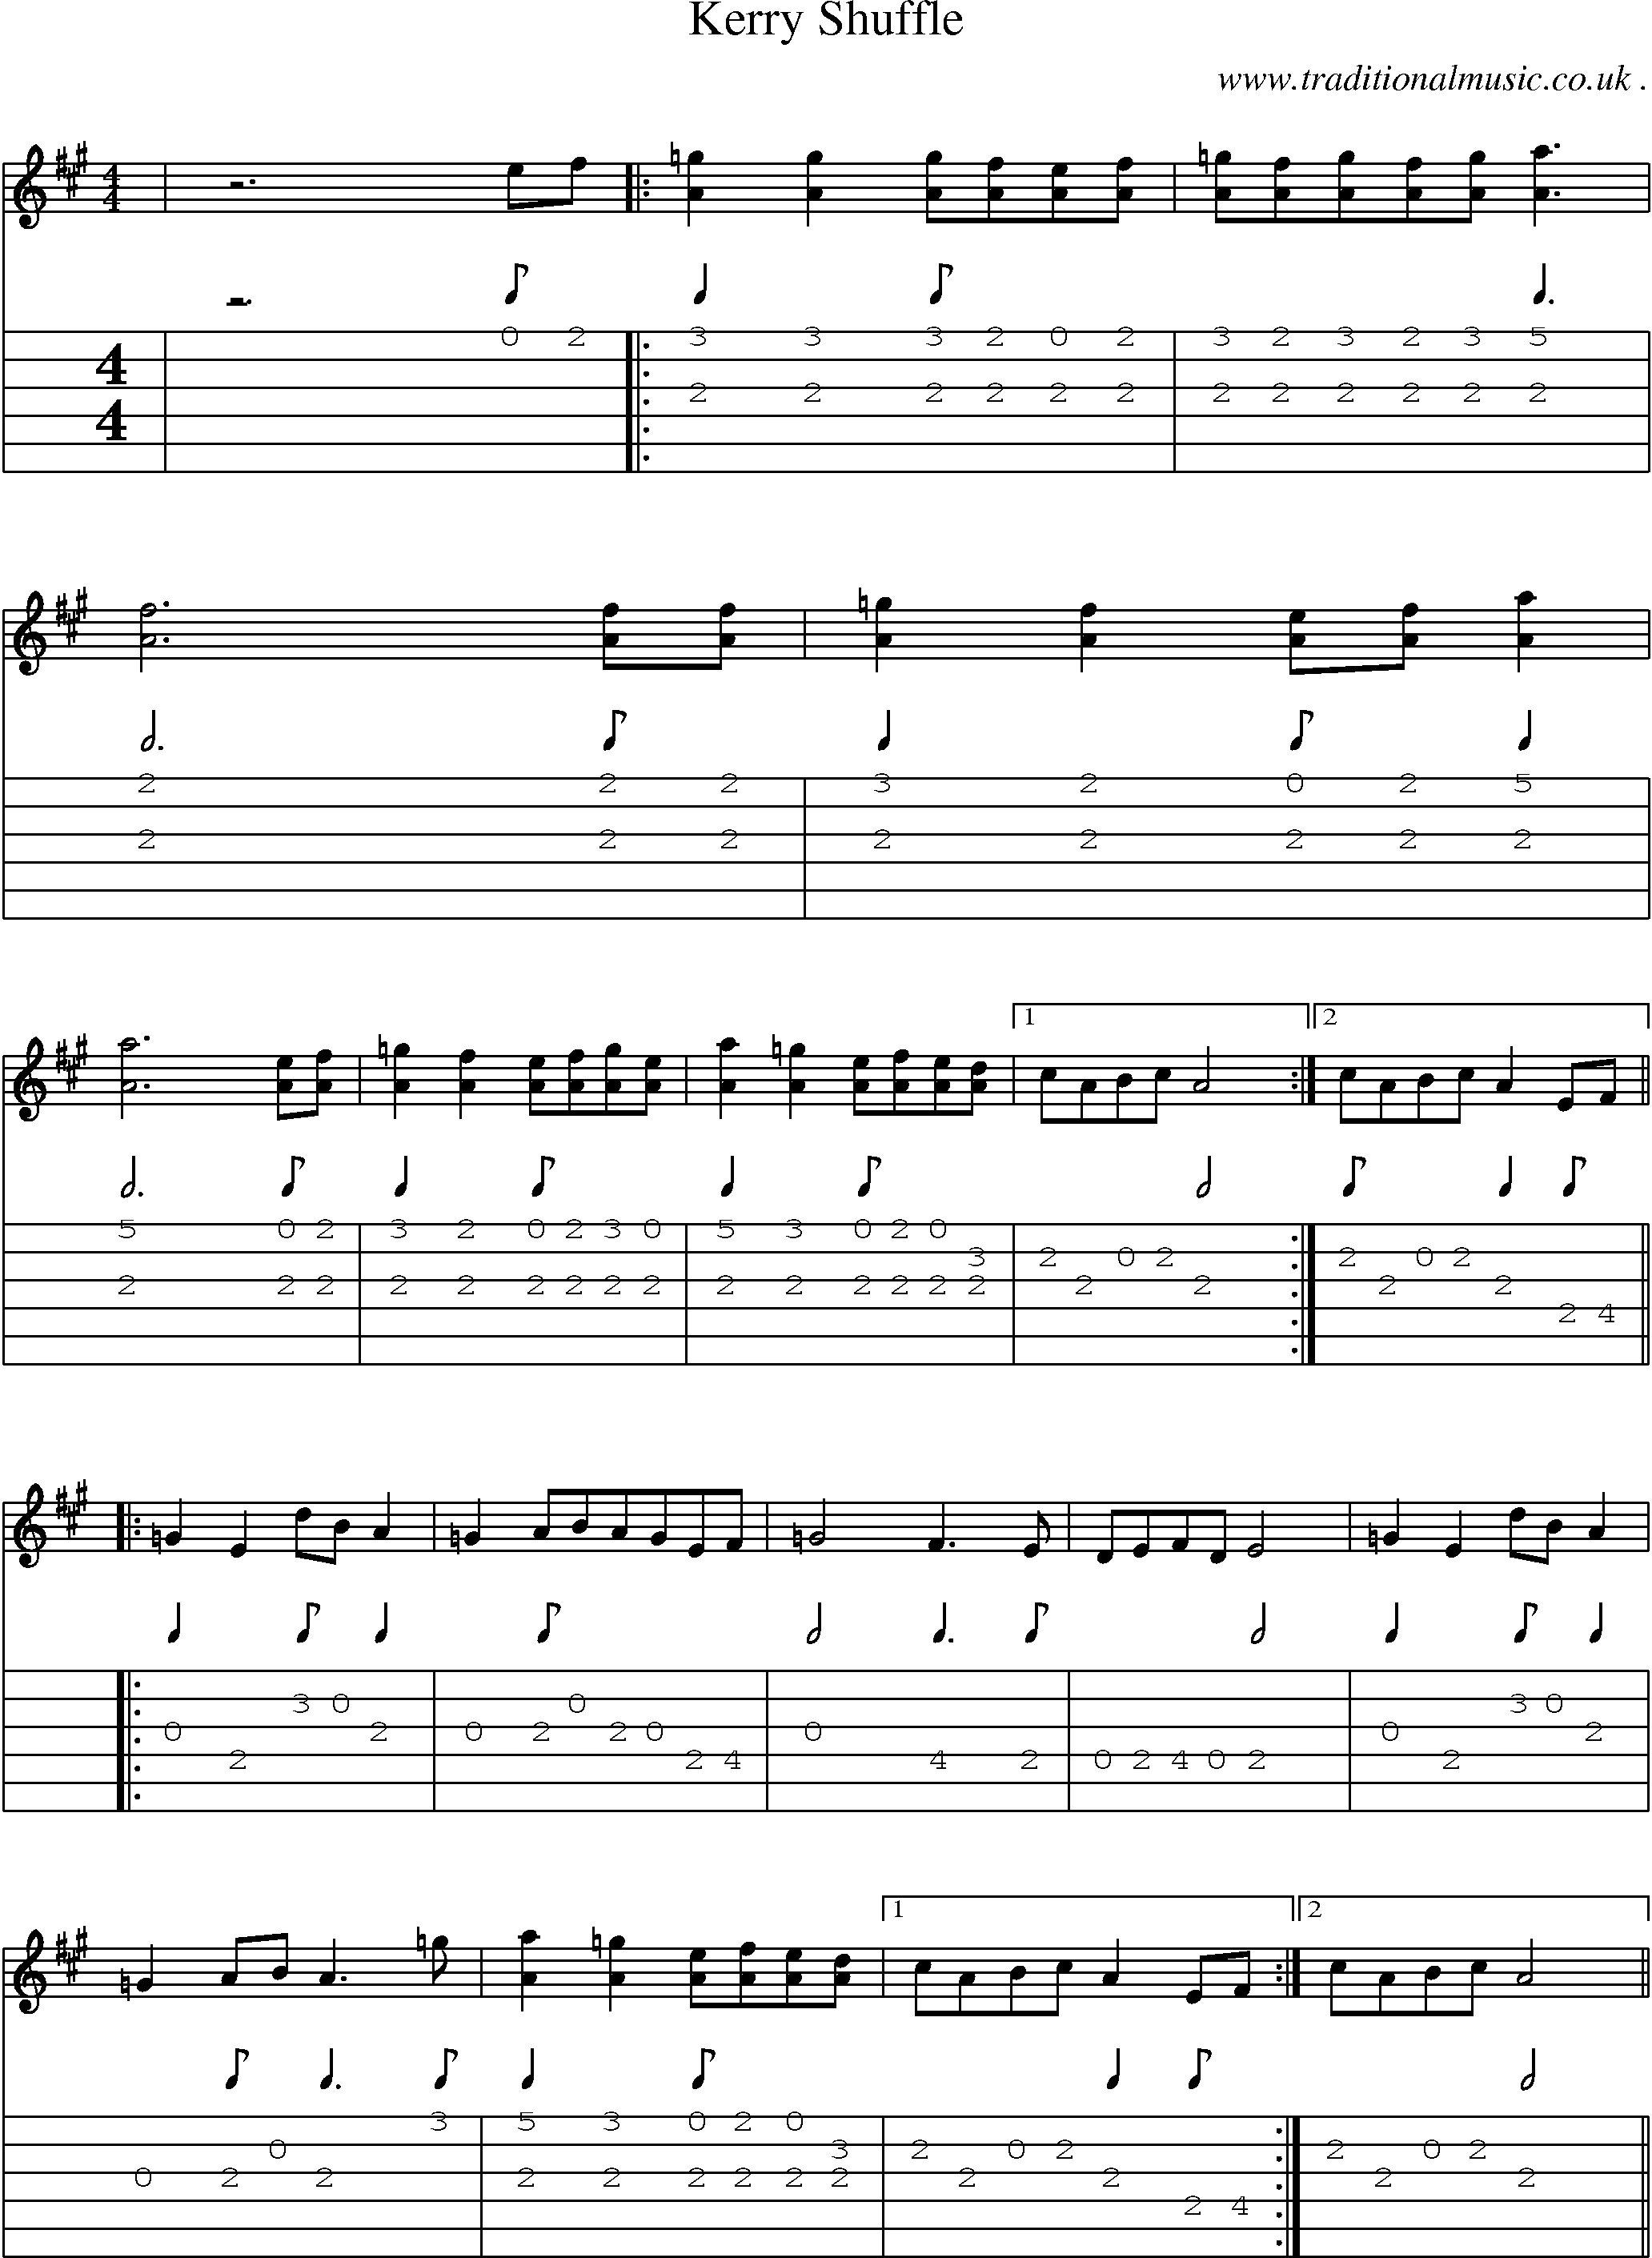 Music Score and Guitar Tabs for Kerry Shuffle